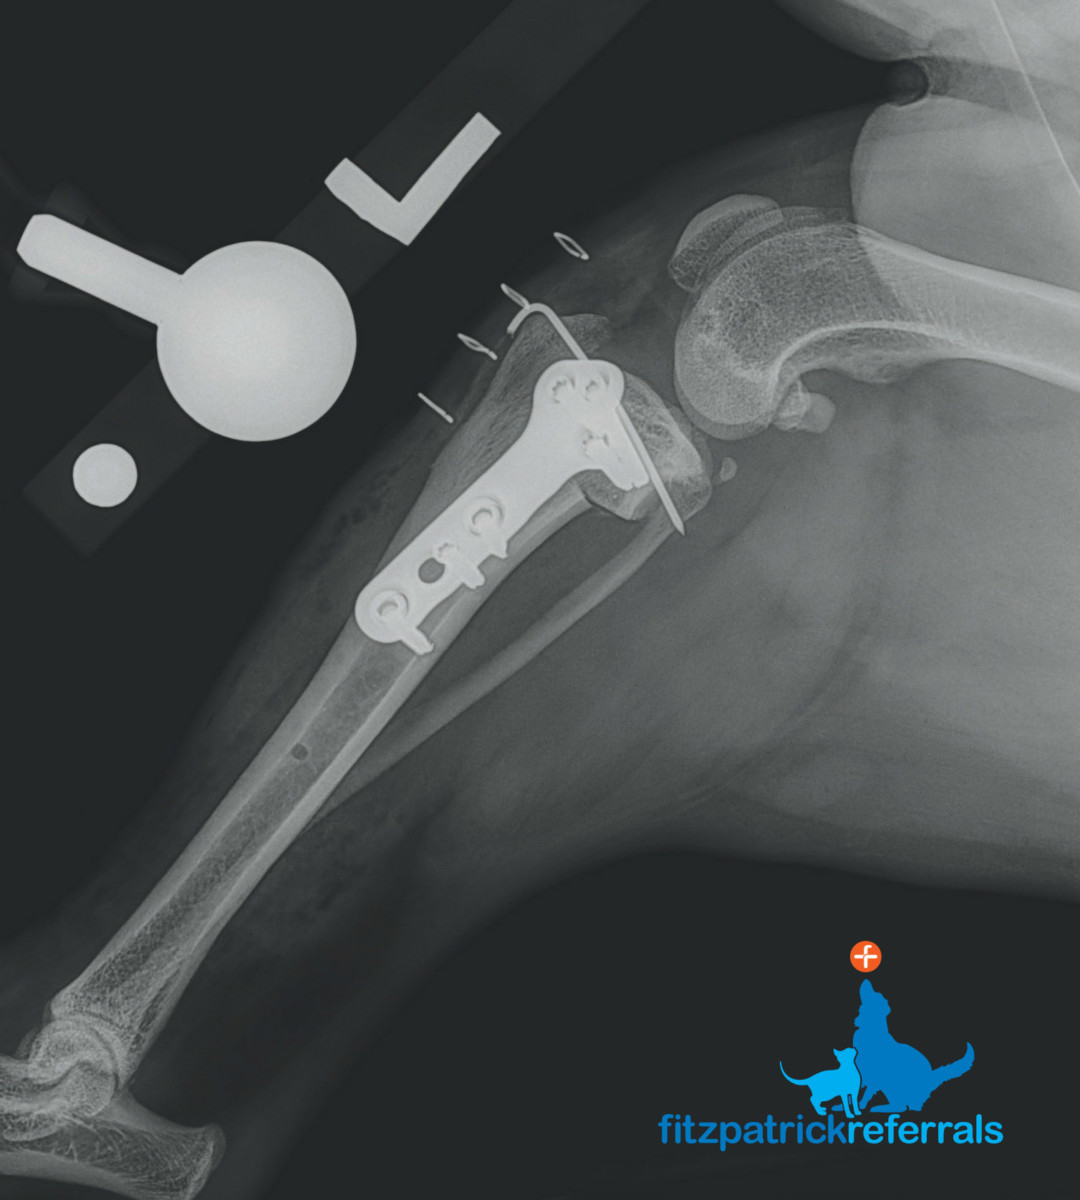 Post-op radiograph of a dog's left tibiae following TPLO surgery at Fitzpatrick Referrals